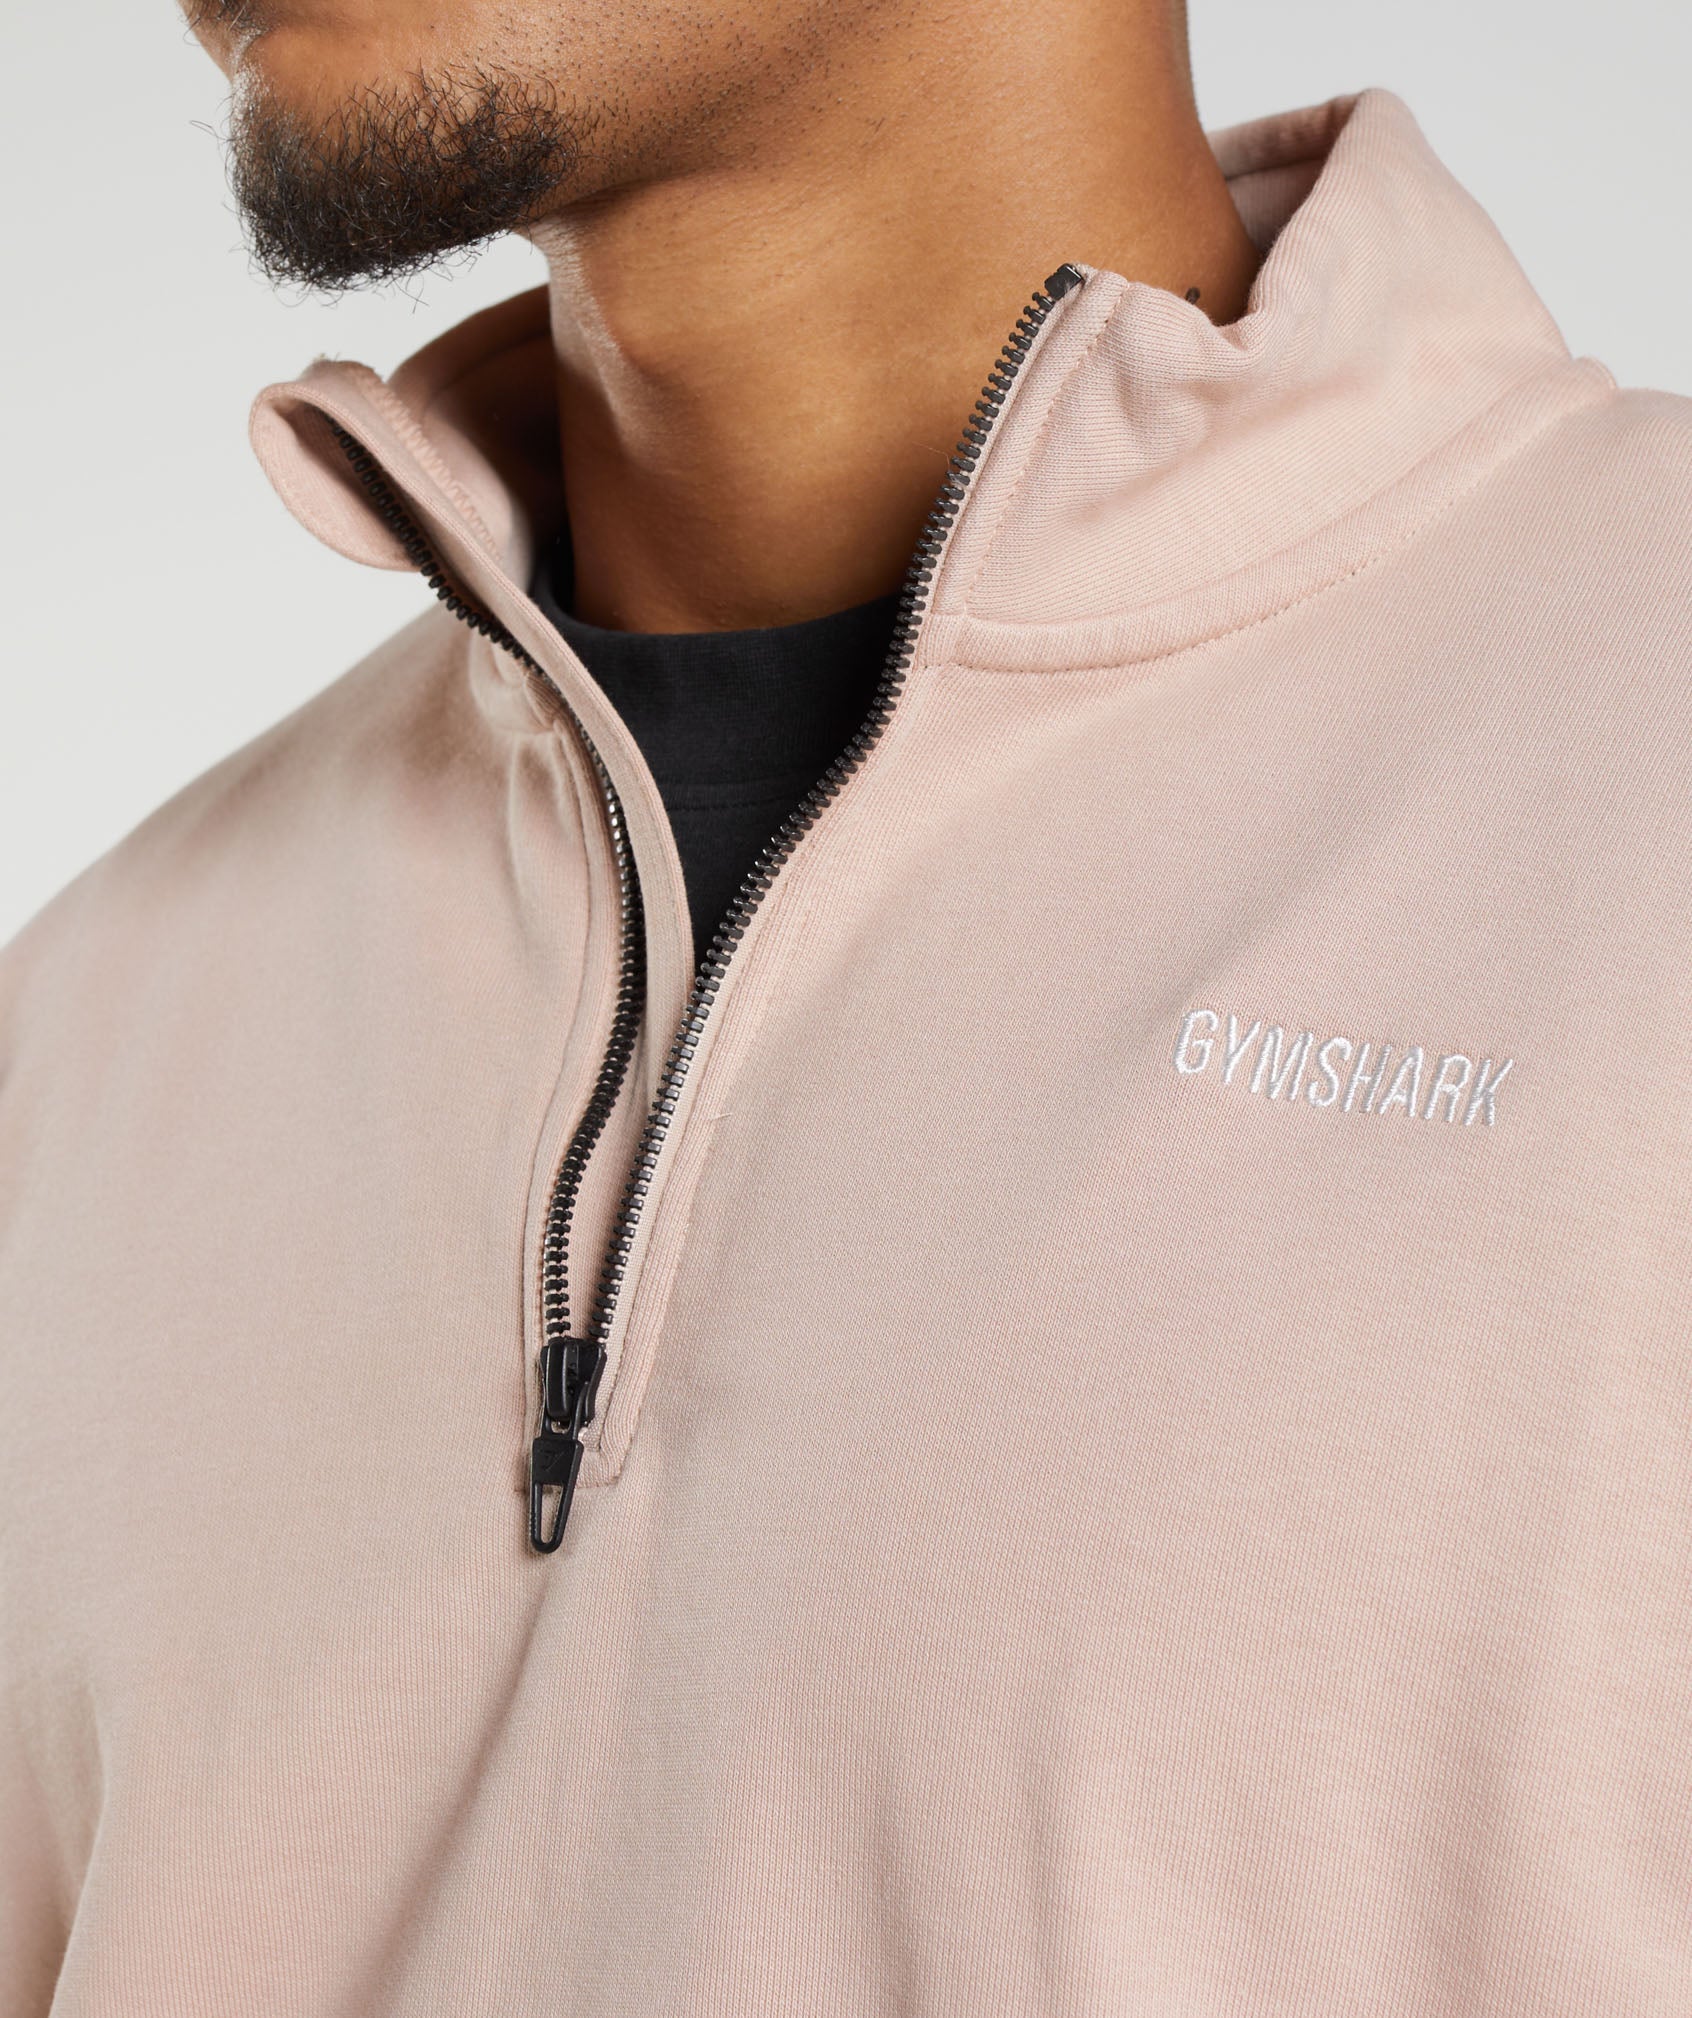 Rest Day Sweats 1/4 Zip product image 7